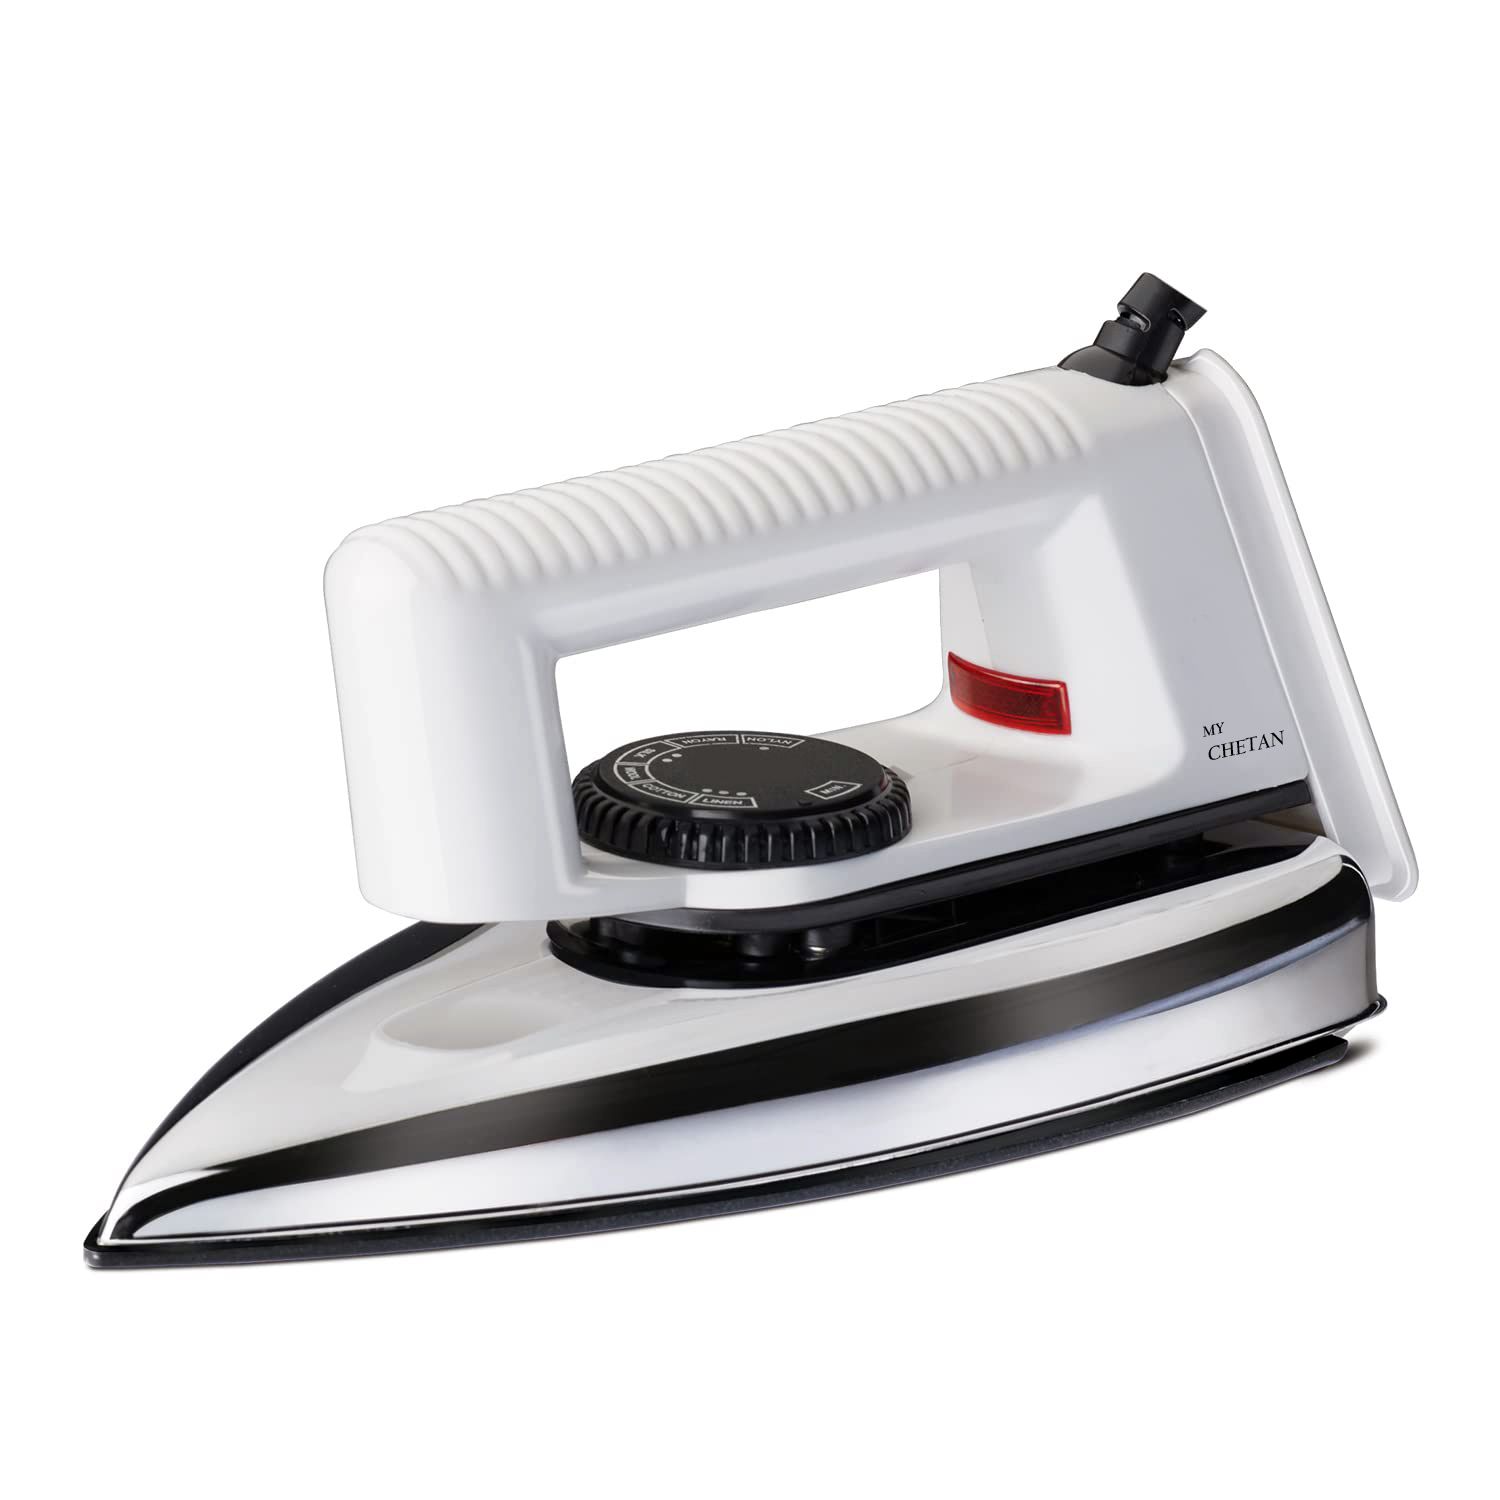 MYCHETAN Dry Iron Smarty | Stainless Steel Popular Light Weight 750W Press with Advance Soleplate | Anti-Bacterial German Coating Technology White 750 Watt